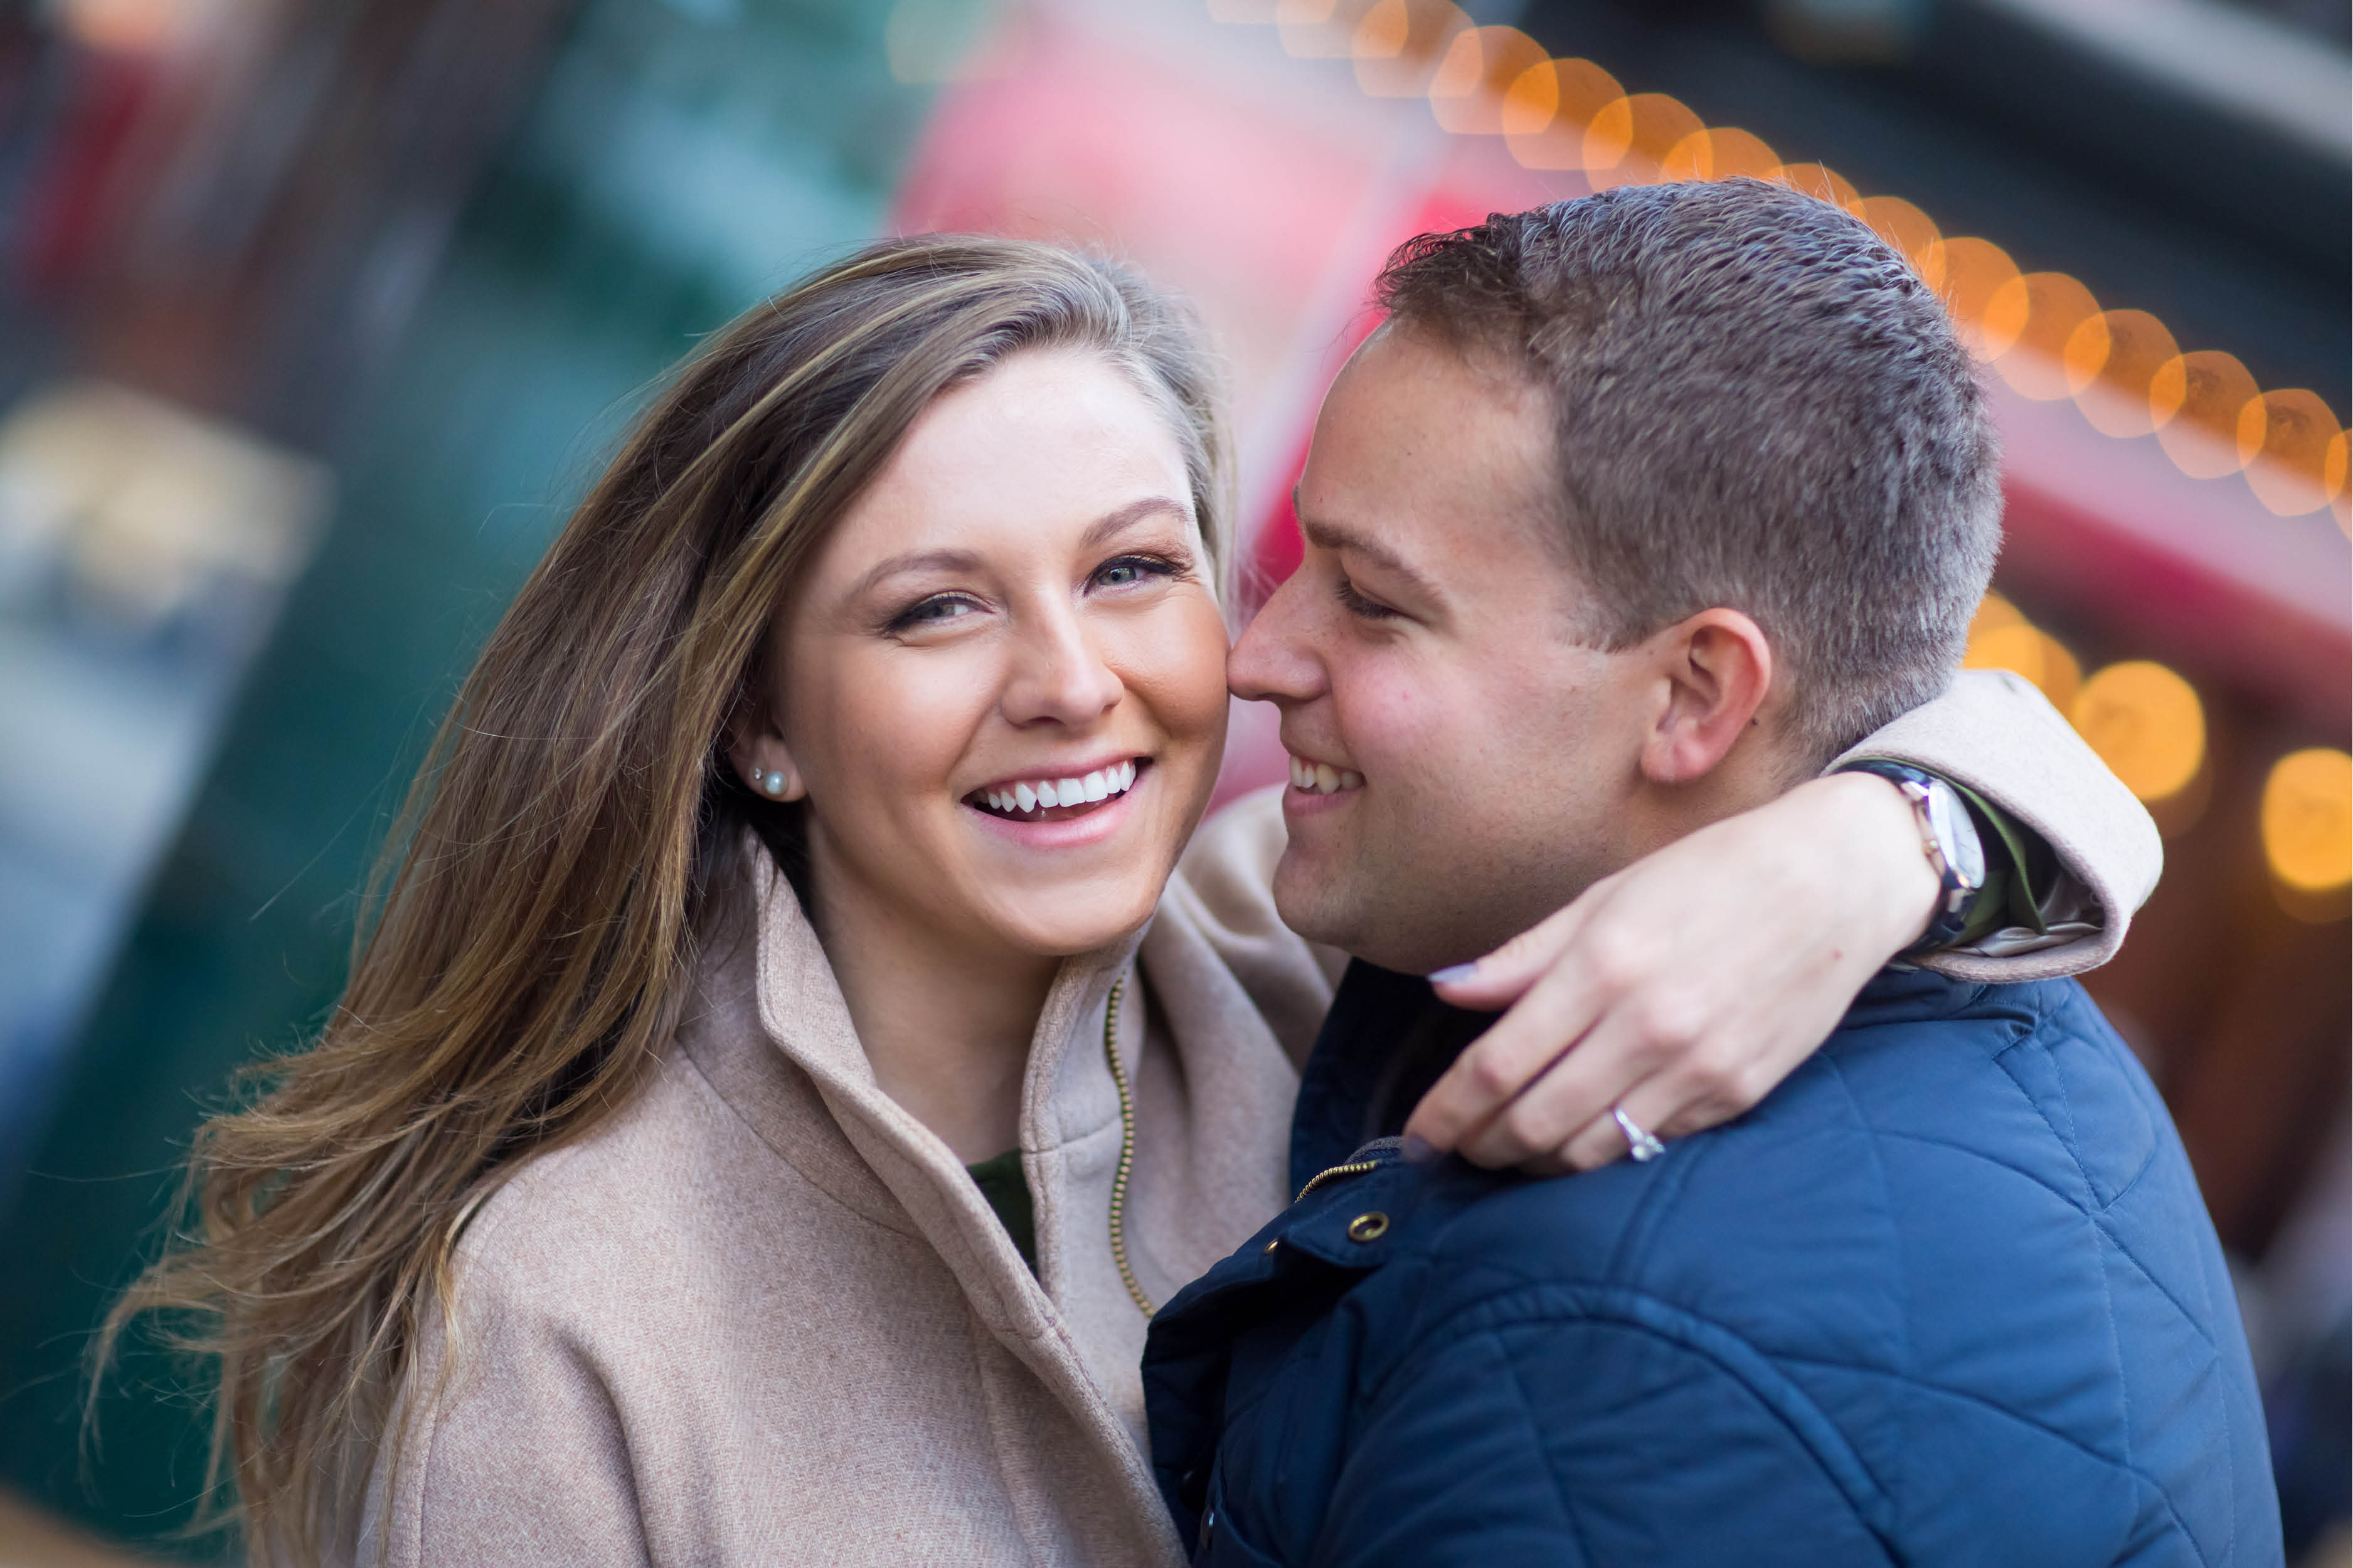 Emma_cleary_photography Engagement shoot west vilage10